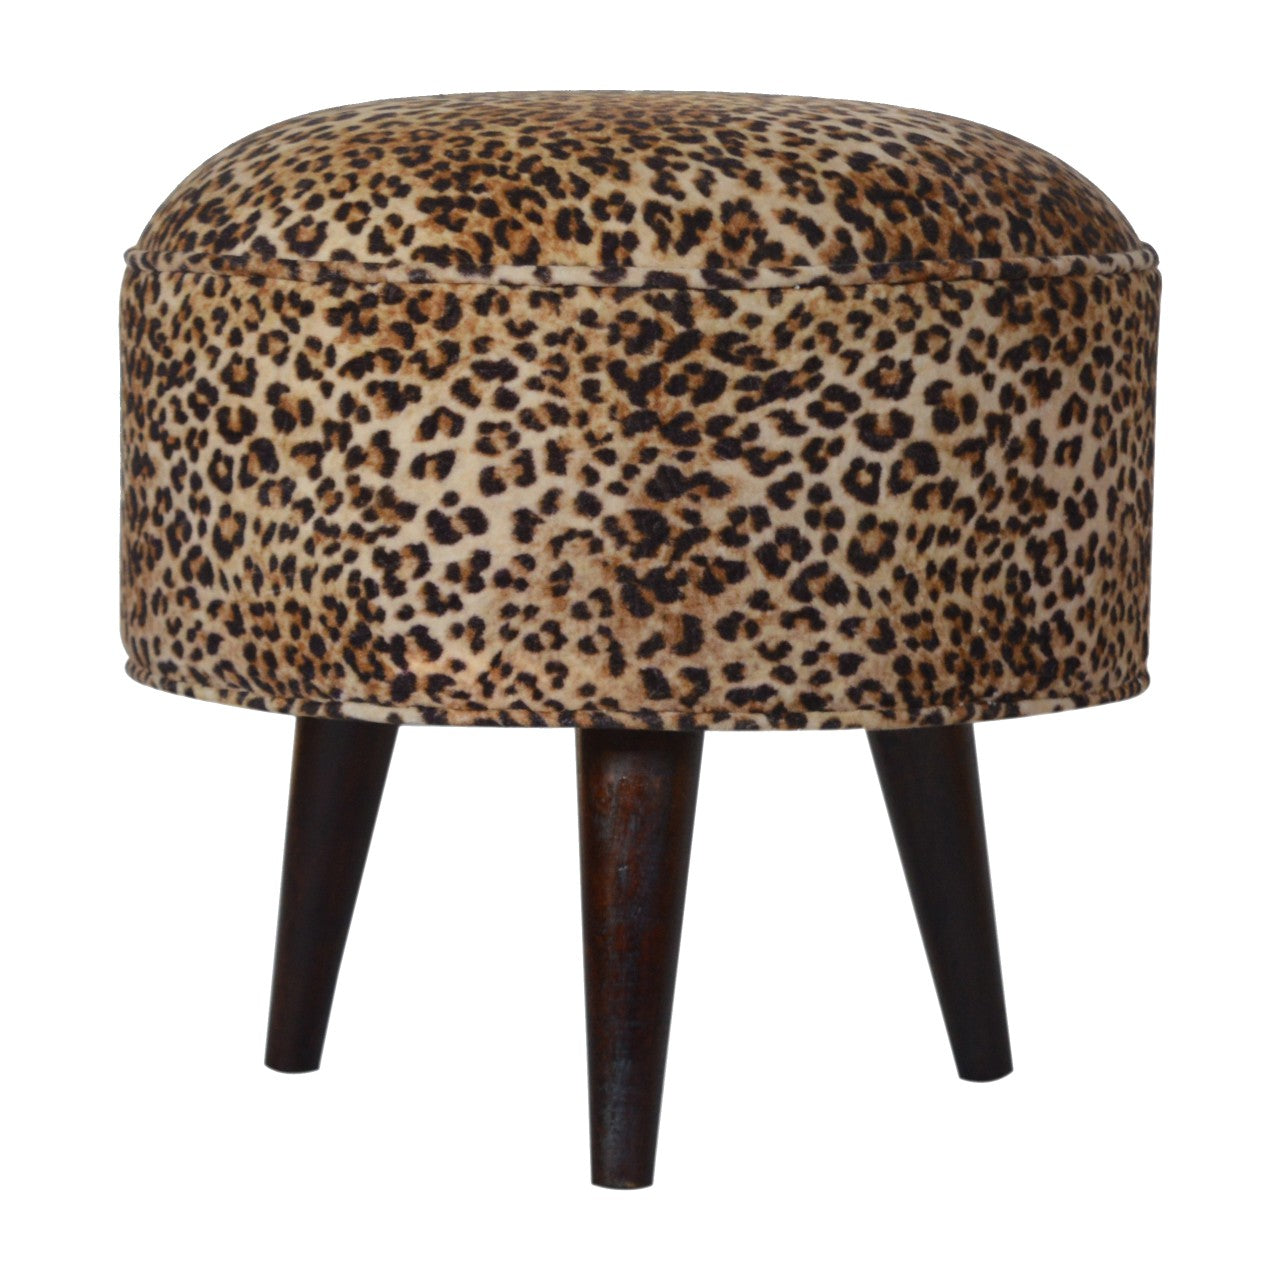 Solid Wood Leopard Print Velvet Footstool In Walnut Finish With Luxurious Cushioned Upholstery